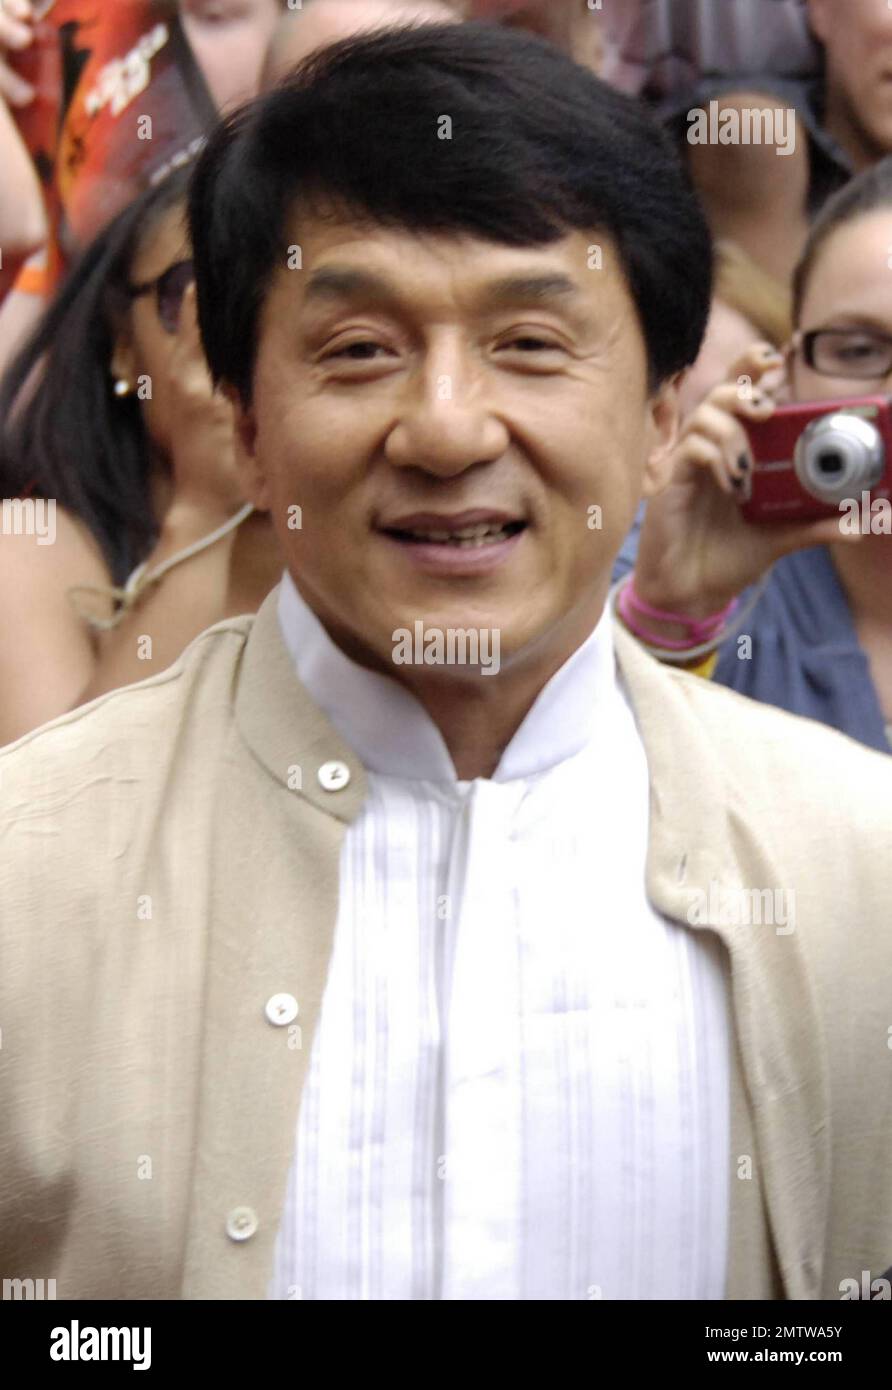 Jackie Chan arrives at a screening of 'The Karate Kid' held at AMC River East 21 cinemas.  'The Karate Kid' is 12-year-old Jaden Smith's, son of superstar actor Will Smith, third film.  Will was also on hand to support his son, as the two gladly met with waiting fans. Chicago, IL. 05/26/10.   . Stock Photo